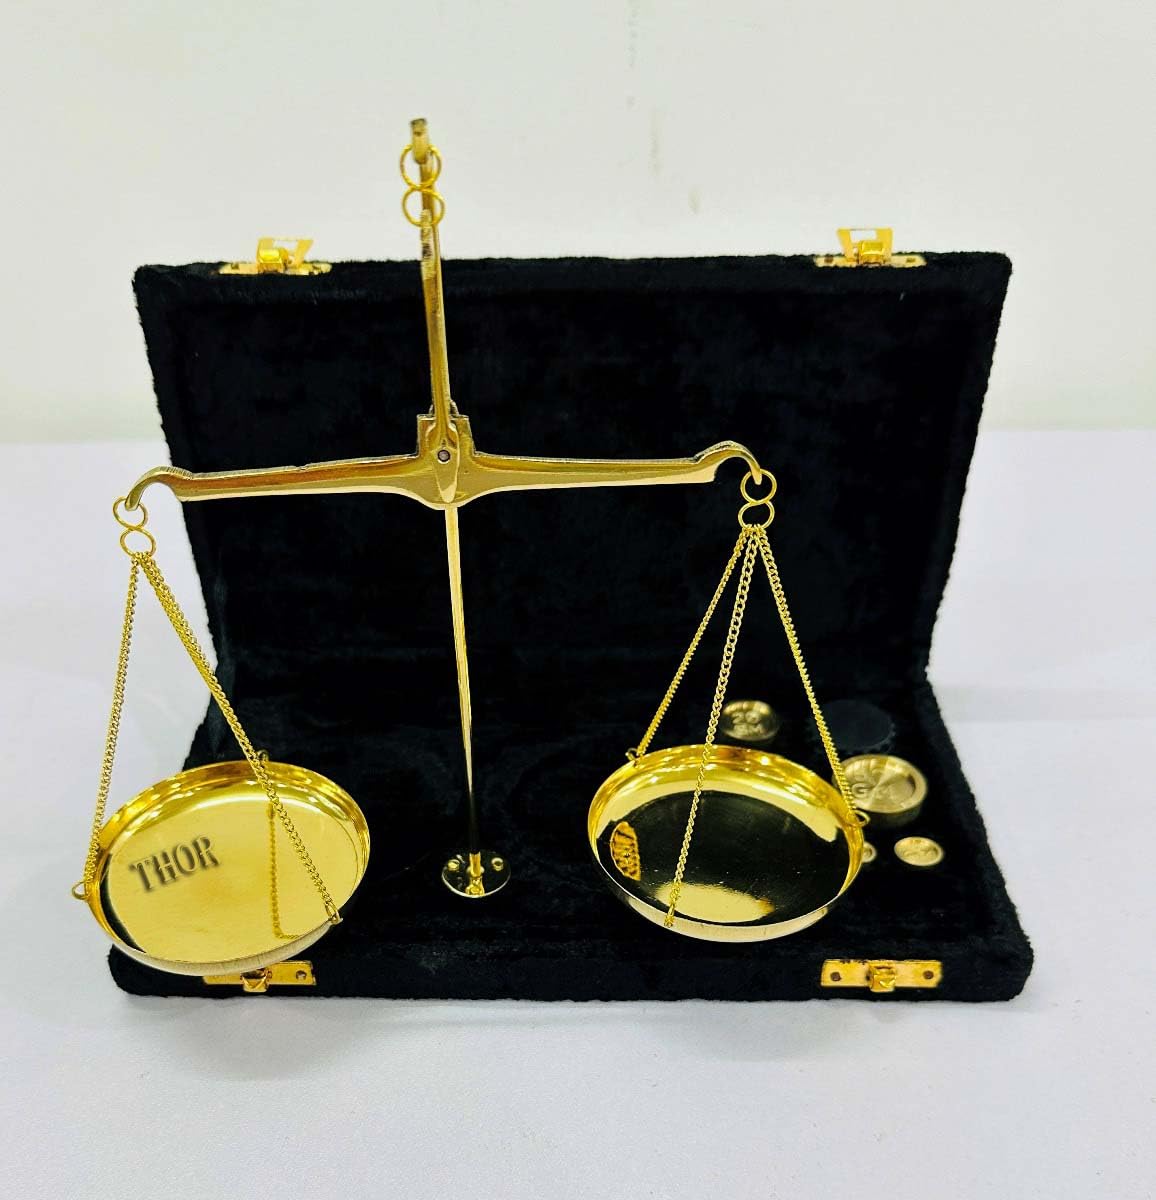 Gold Brass Jewelry Scale with Black Box Goldsmith Weight Taraju Showpiece Levels & Measuring Tool with Weight Balance 10 x 5 inches